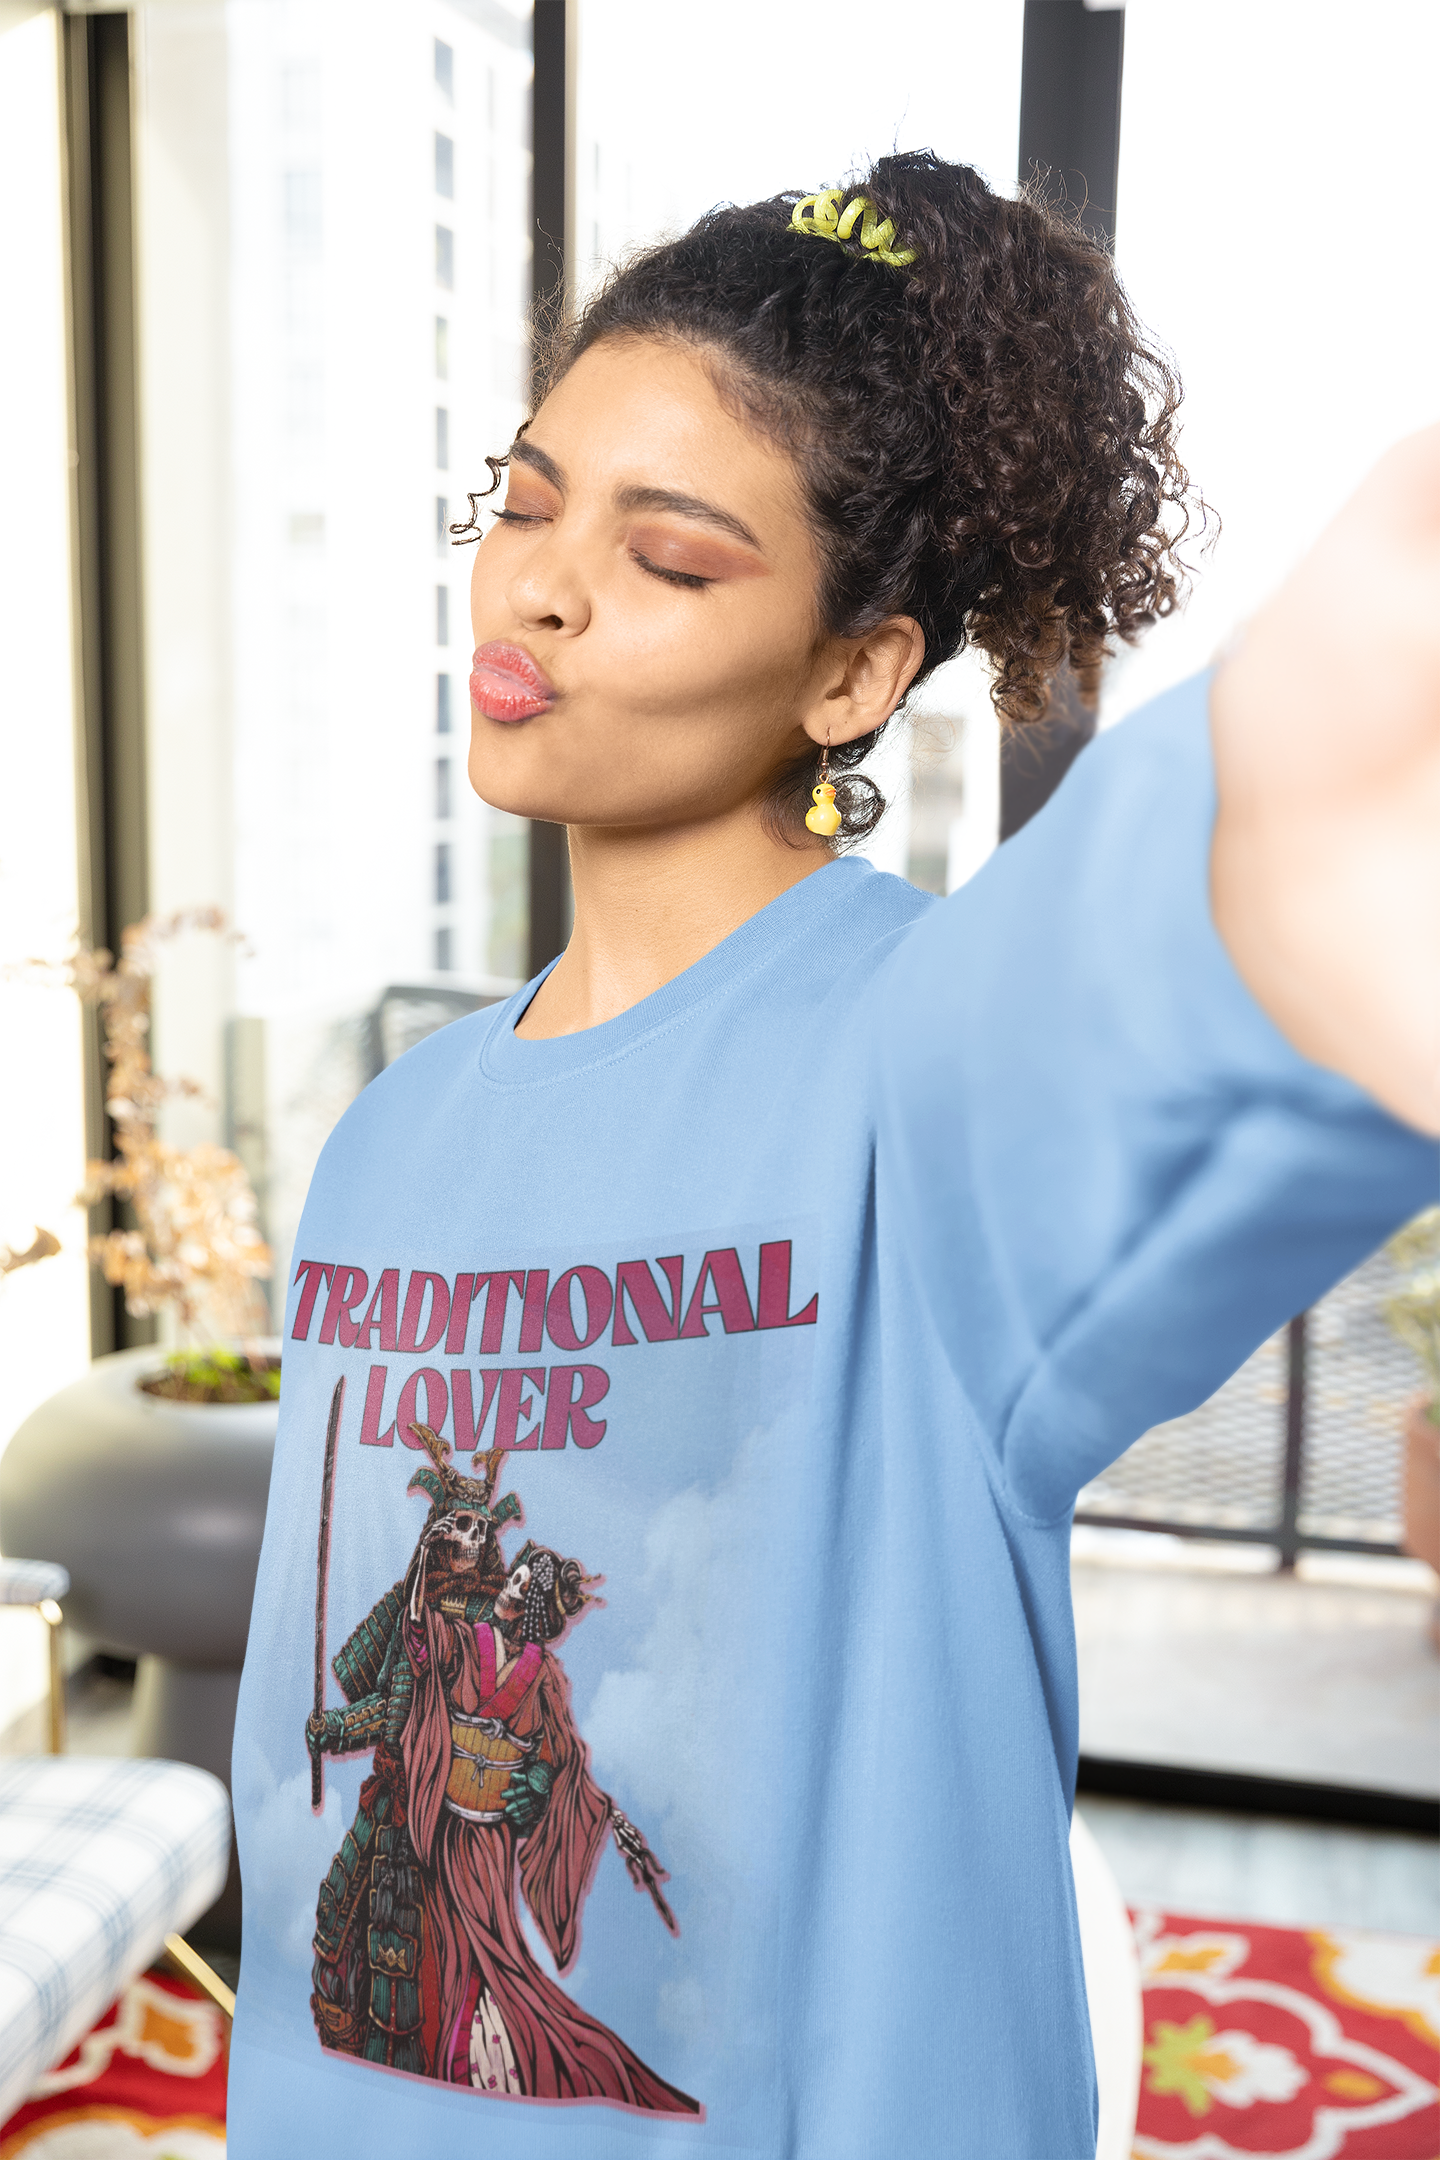 TRADITIONAL LOVER - Unisex